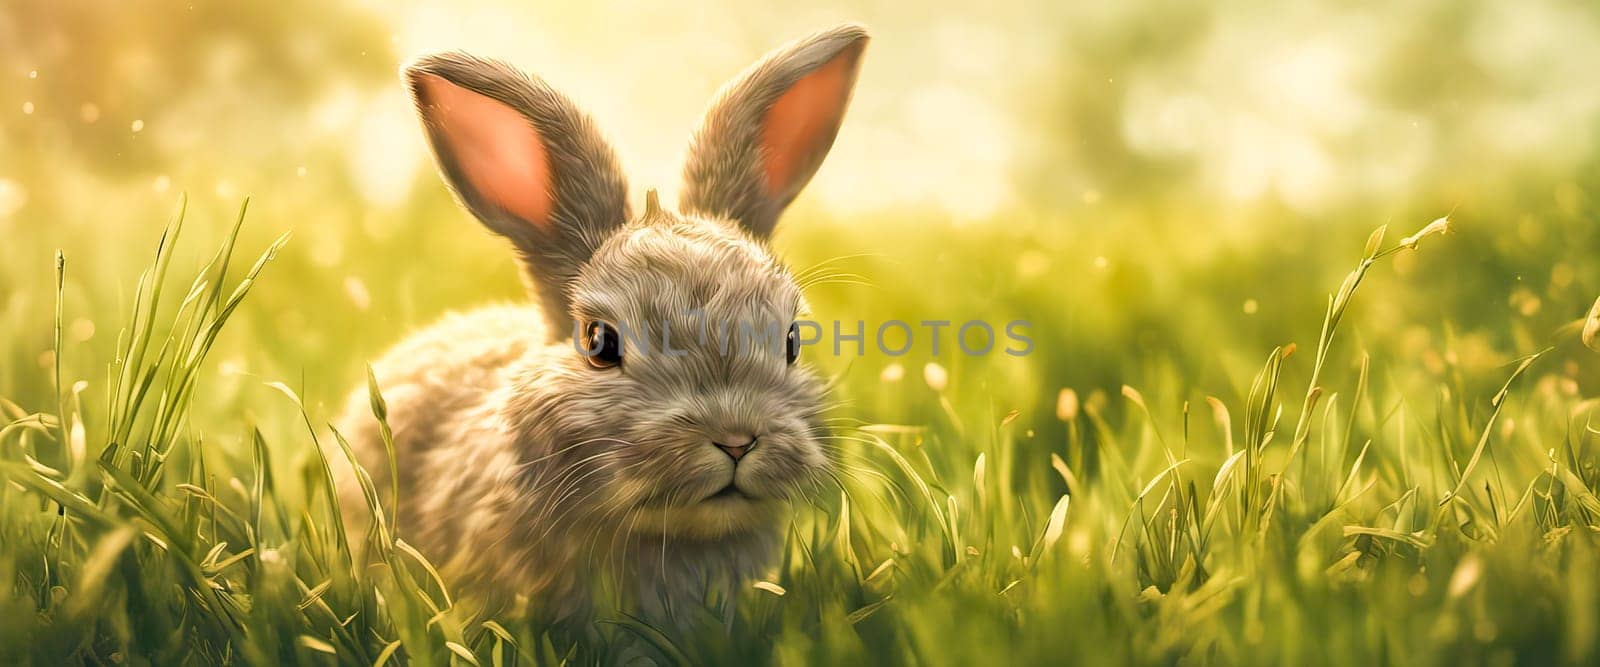 Banner fluffy bunny in a green garden on a sunny day Easter animals background. by EkaterinaPereslavtseva